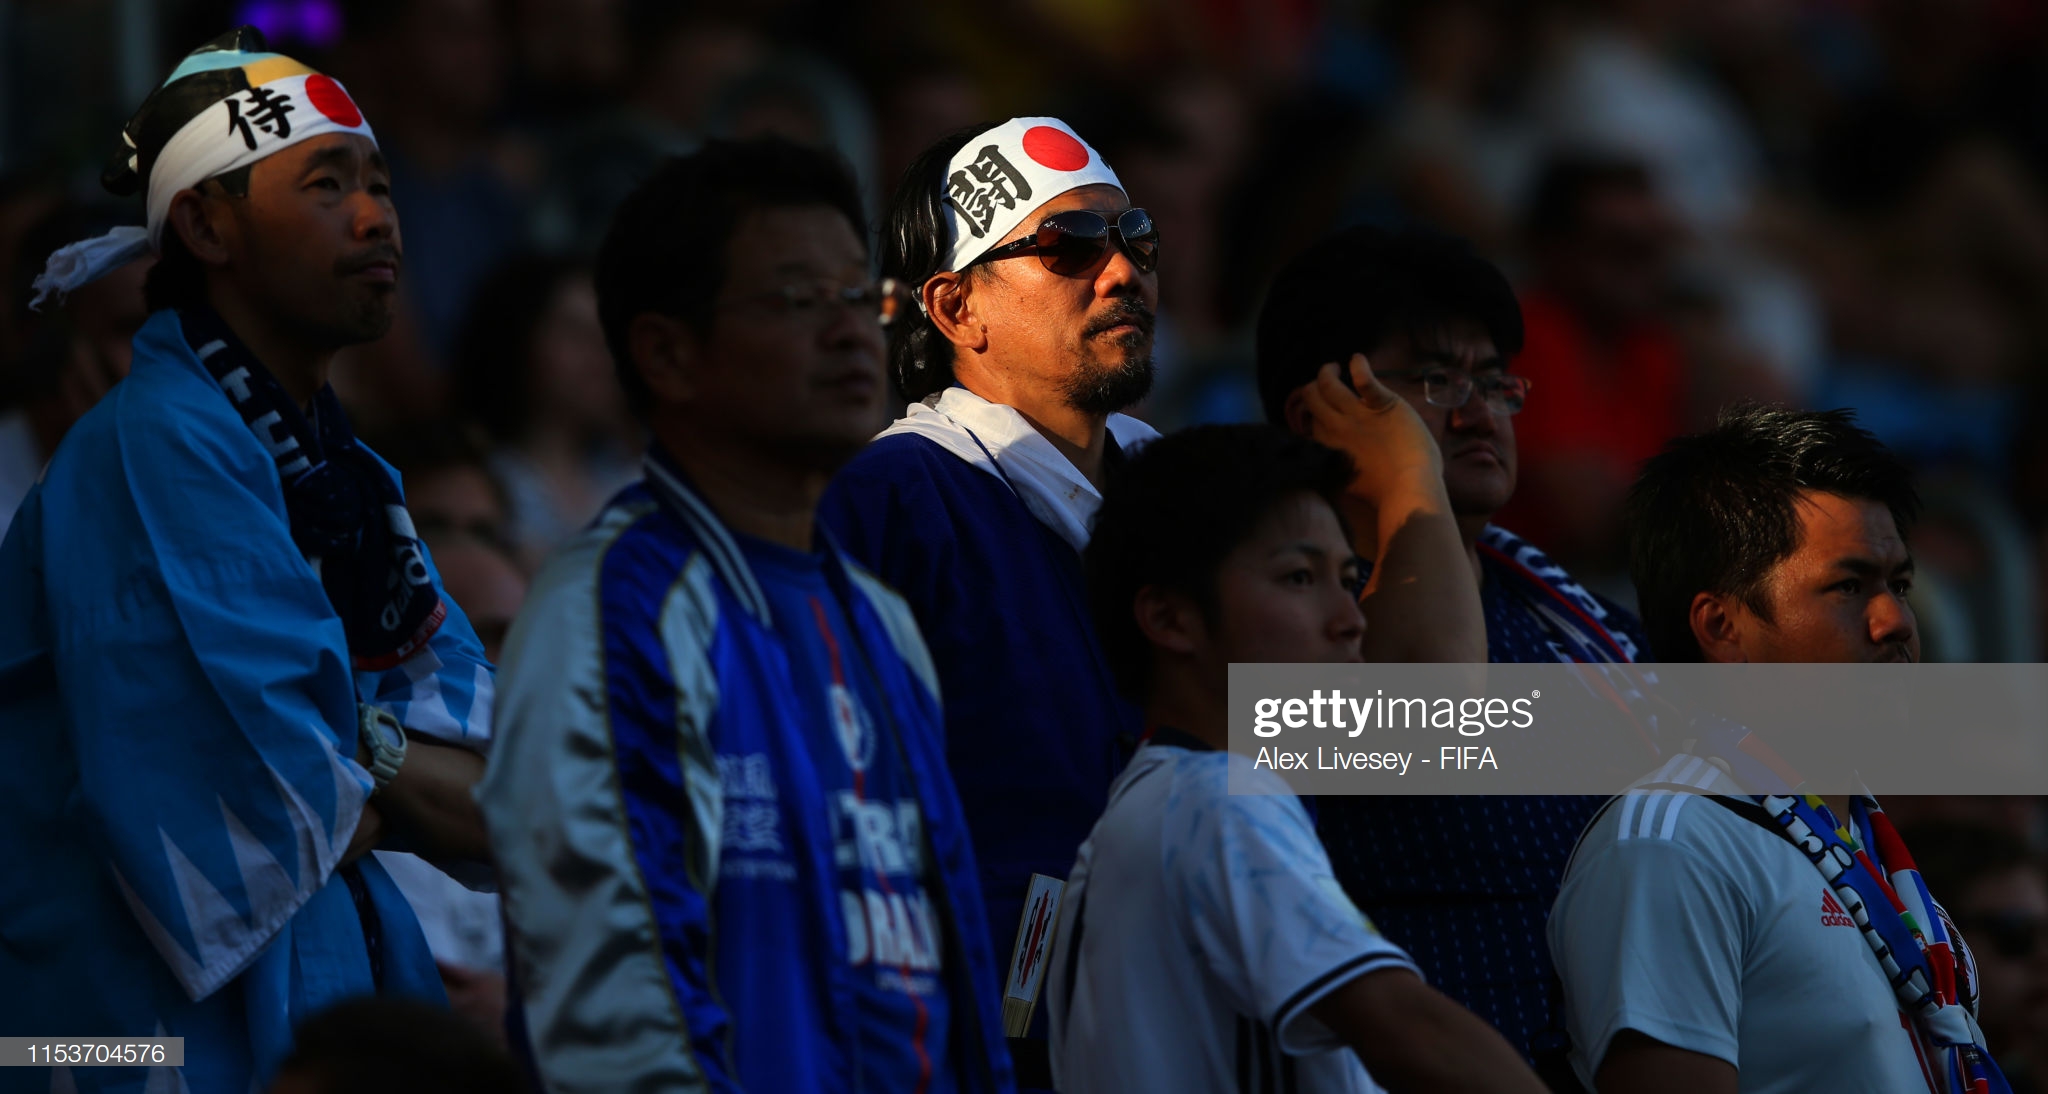 gettyimages-1153704576-2048x2048.jpg